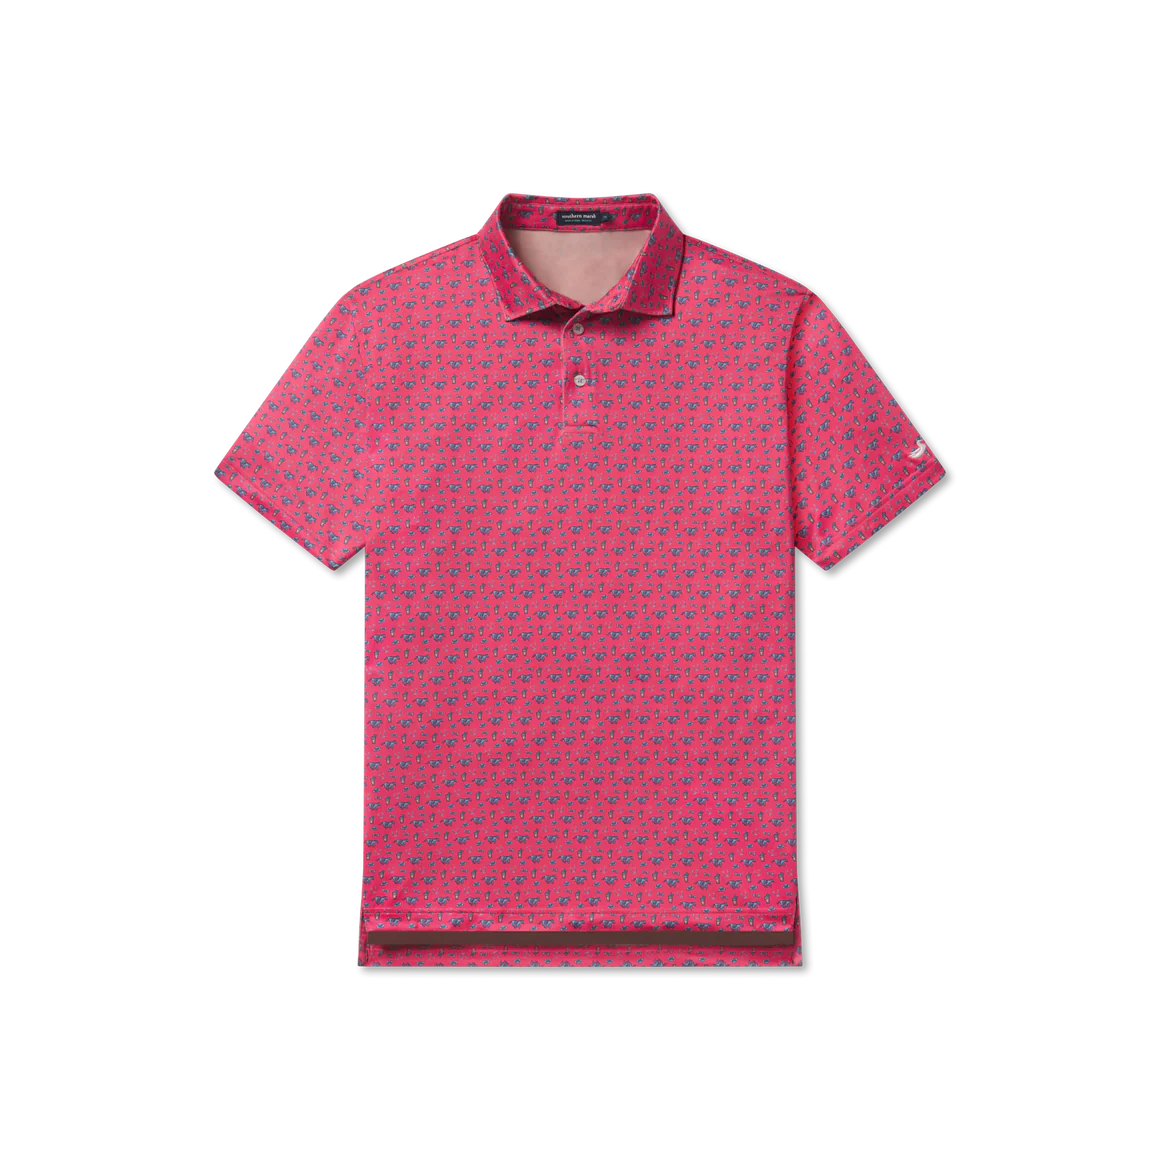 Southern Marsh Flyline Performance Polo - Thoroughbred